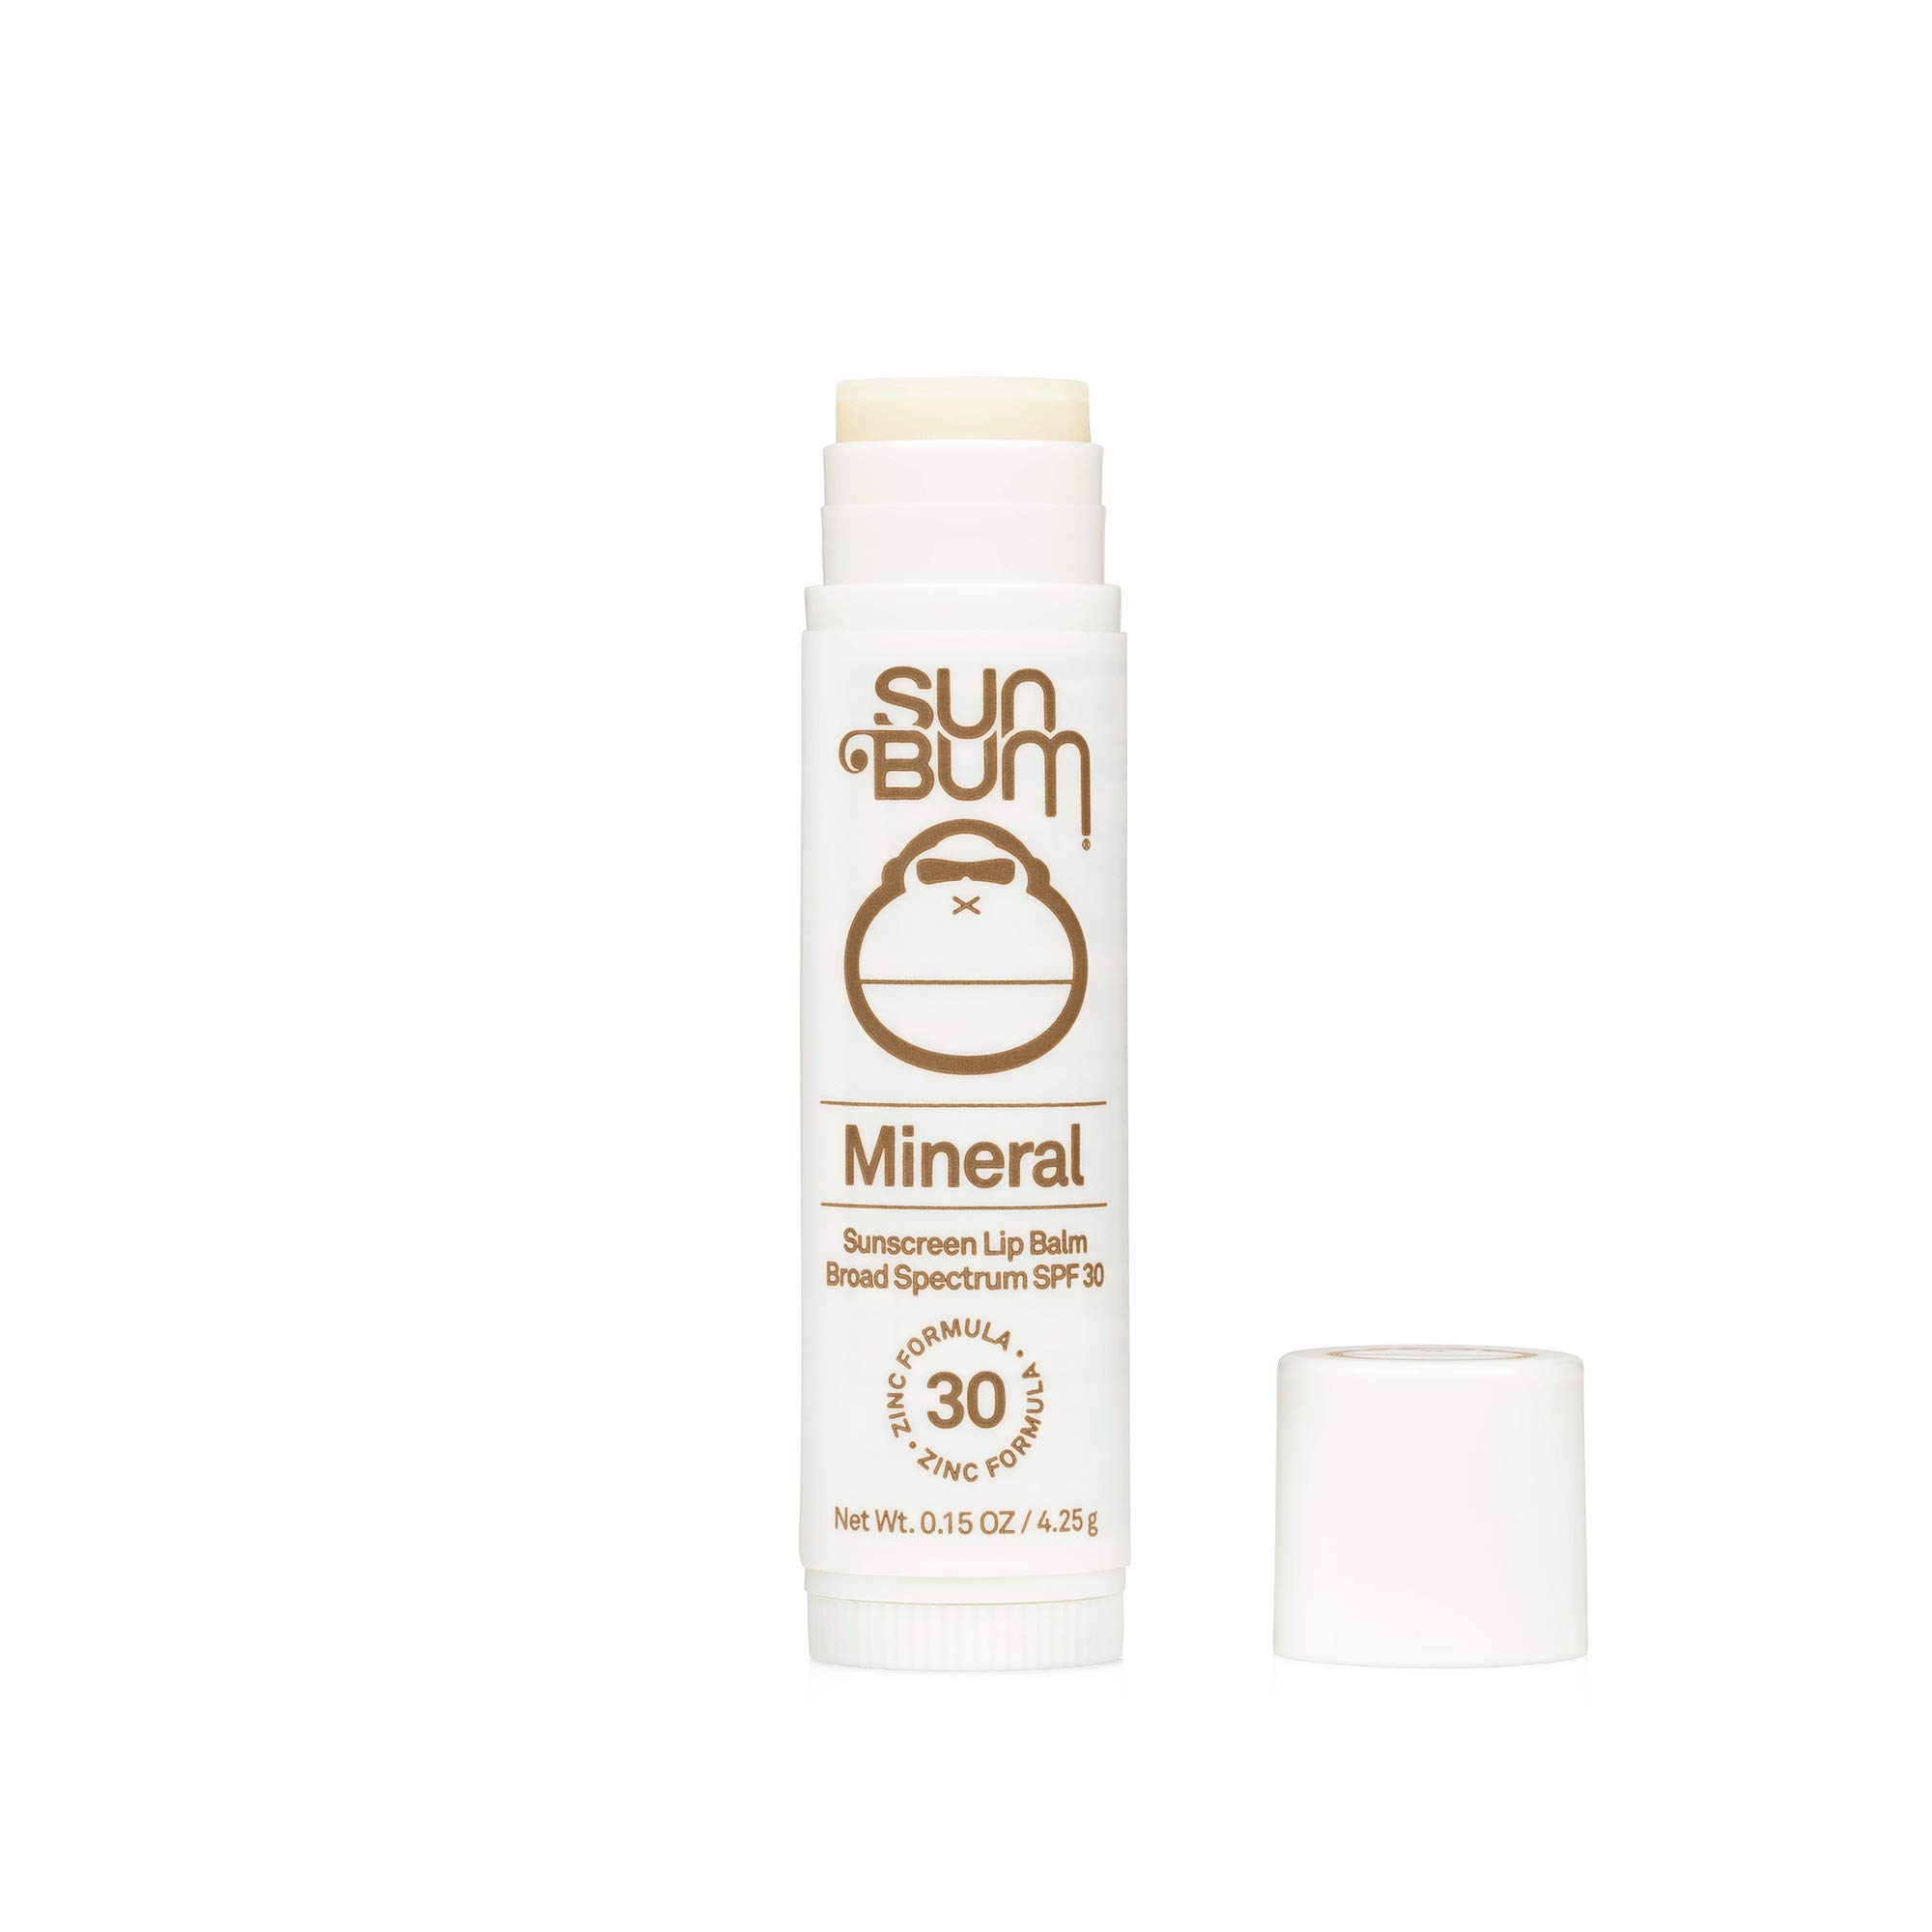 Sun Bum SPF 30 Mineral Sunscreen Lip Balm | Vegan and Hawaii 104 Reef Act Compliant (Octinoxate & Oxybenzone Free) Broad Spectrum Natural Lip Care with UVA/UVB Protection | .15 oz